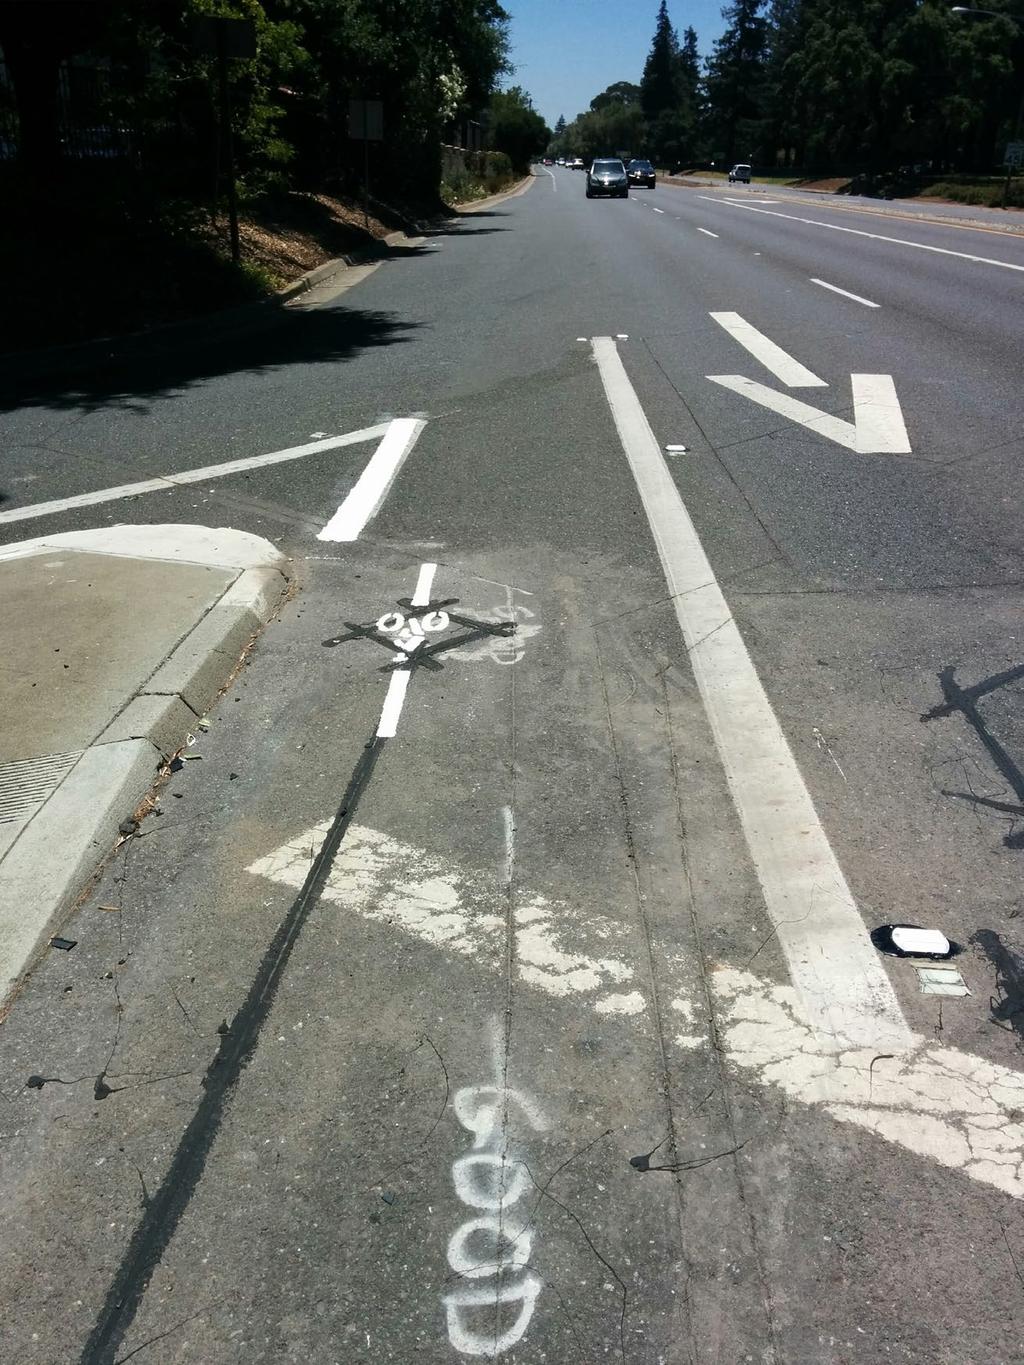 The purpose of a bike detector is to detect a bicyclist approaching an intersection and communicate with the